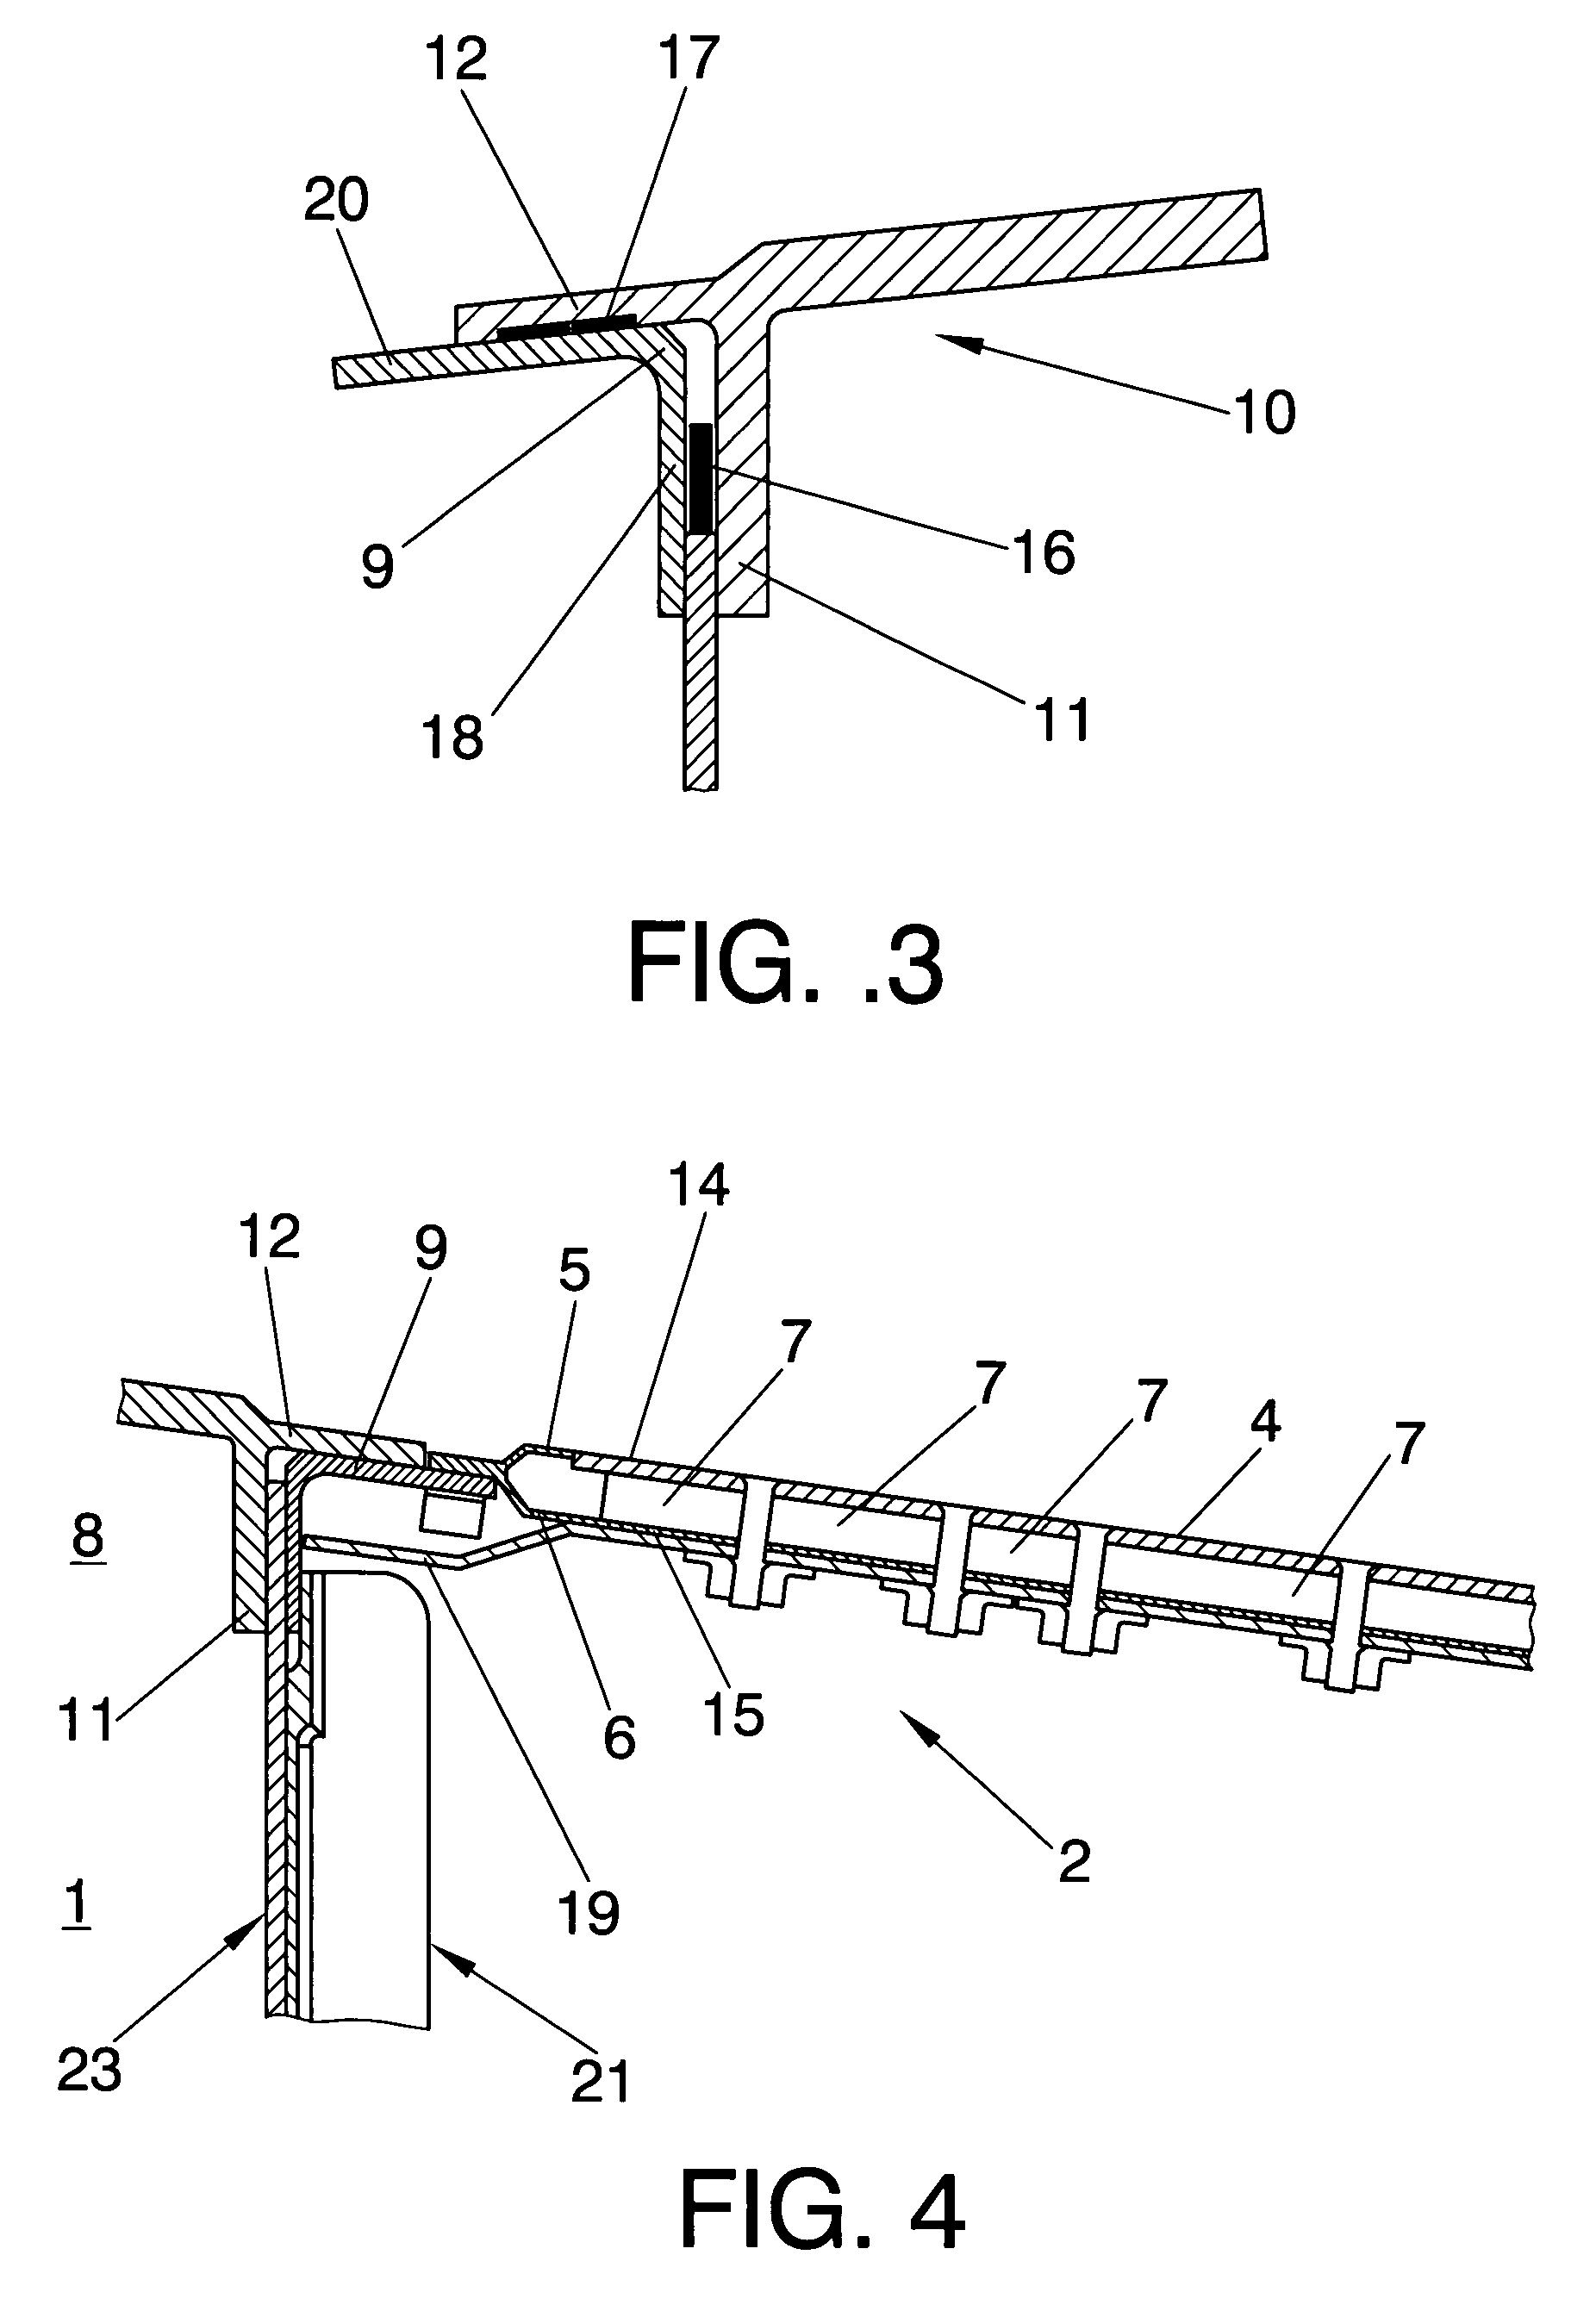 Fixing system for a leading edge to the structure of an aircraft lift plane